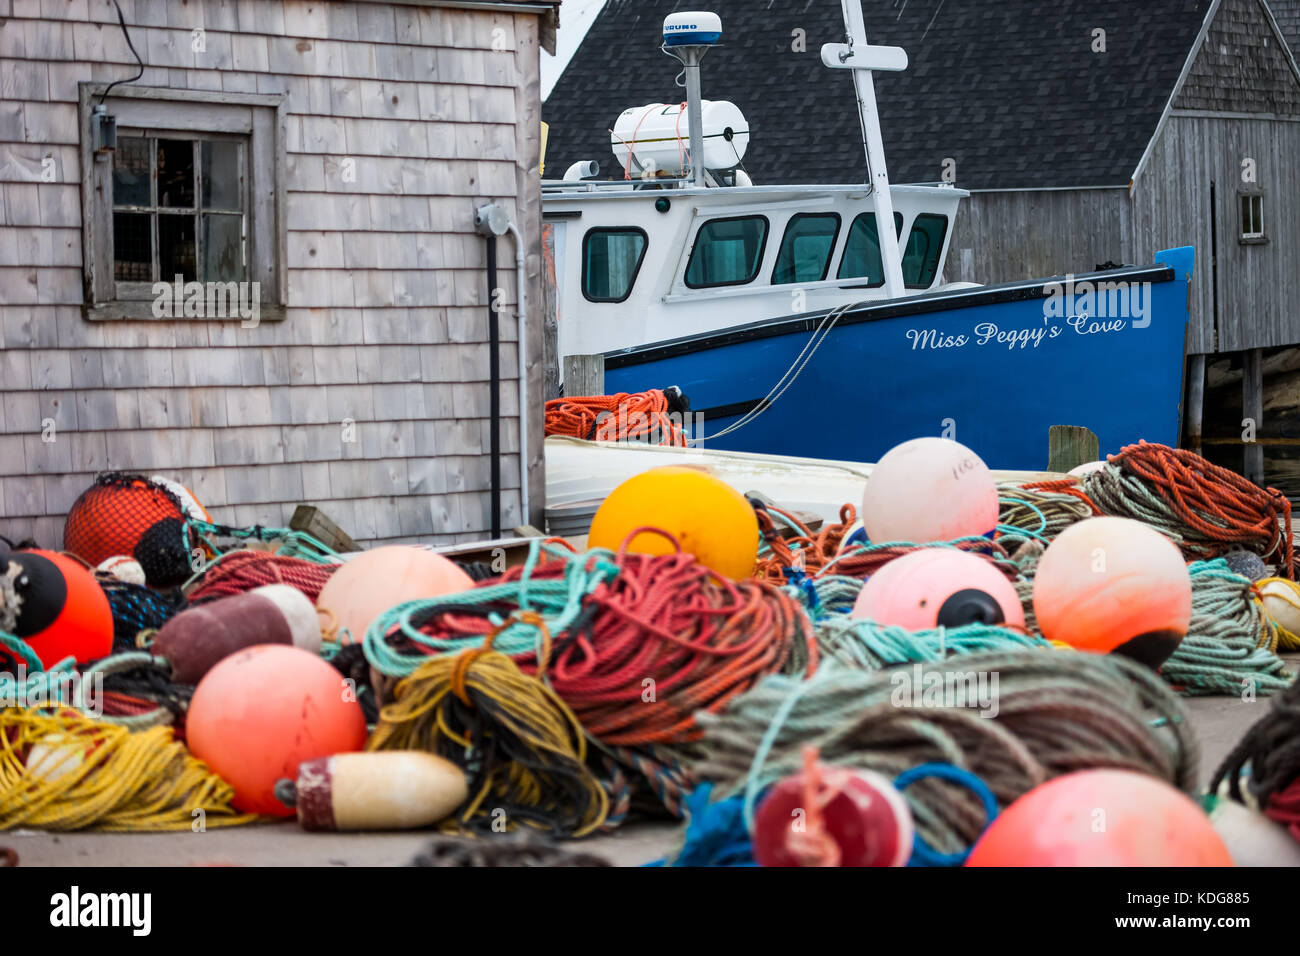 Commercial fishing boats along with their traps, lines and markers tied up to the docks in Peggy's Cove, Nova Scotia on August 30, 2017. Stock Photo